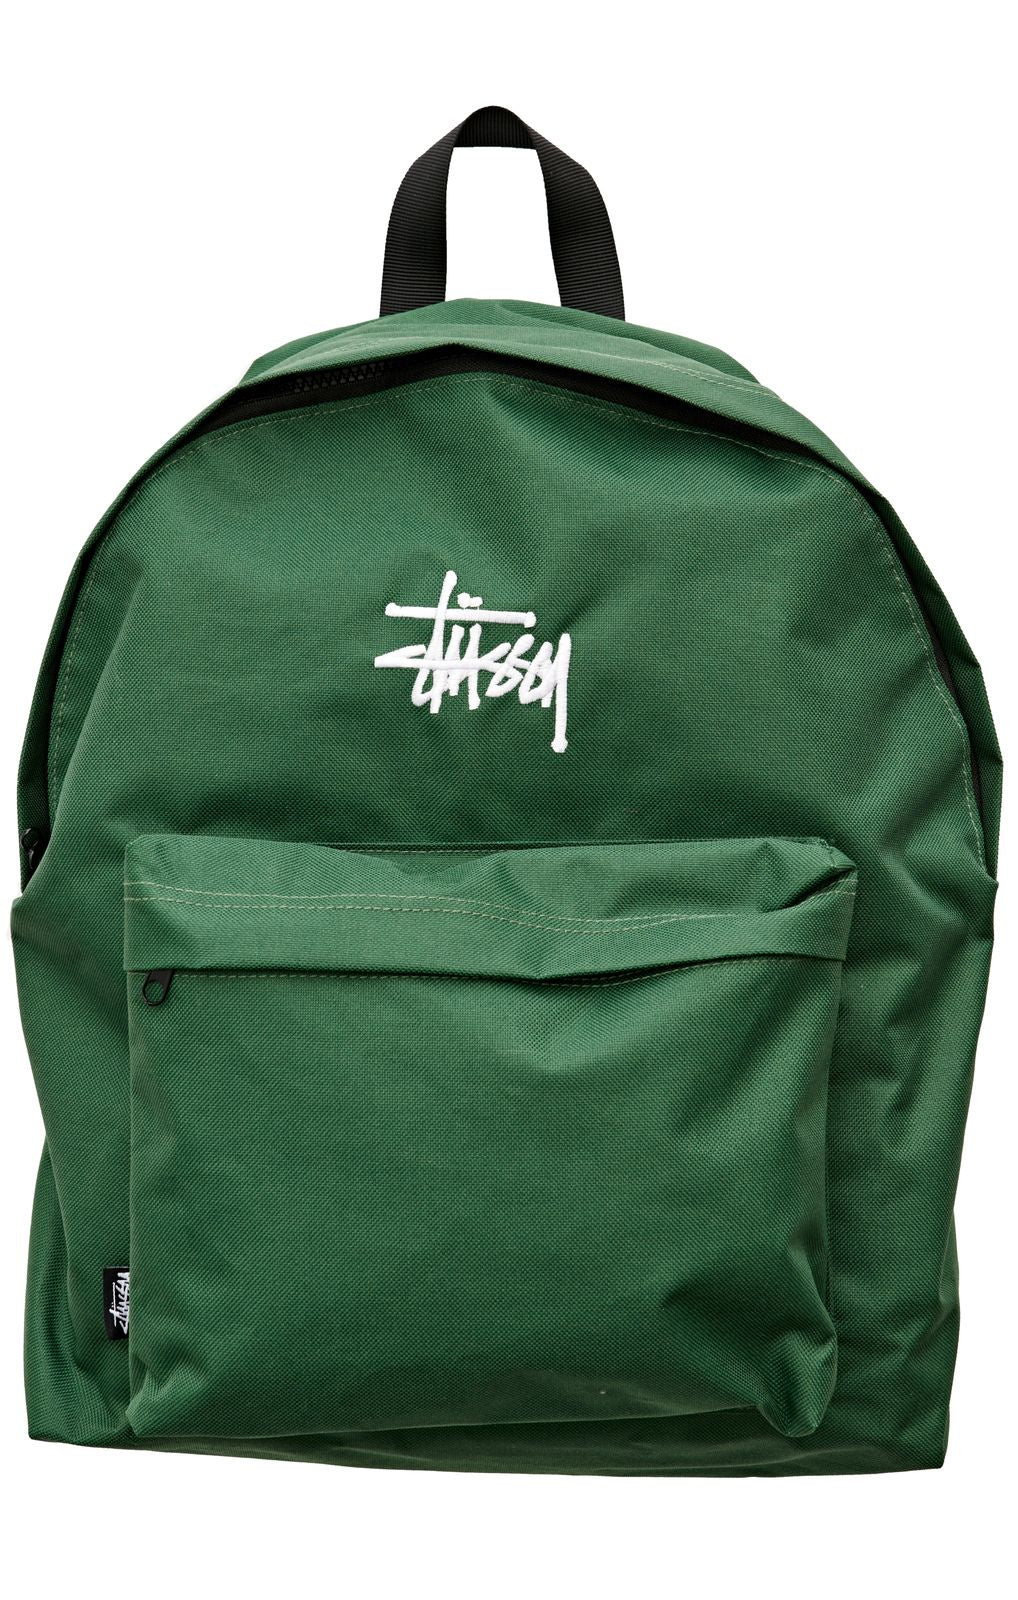 Stussy Graffiti Canvas Backpack Assorted Colors